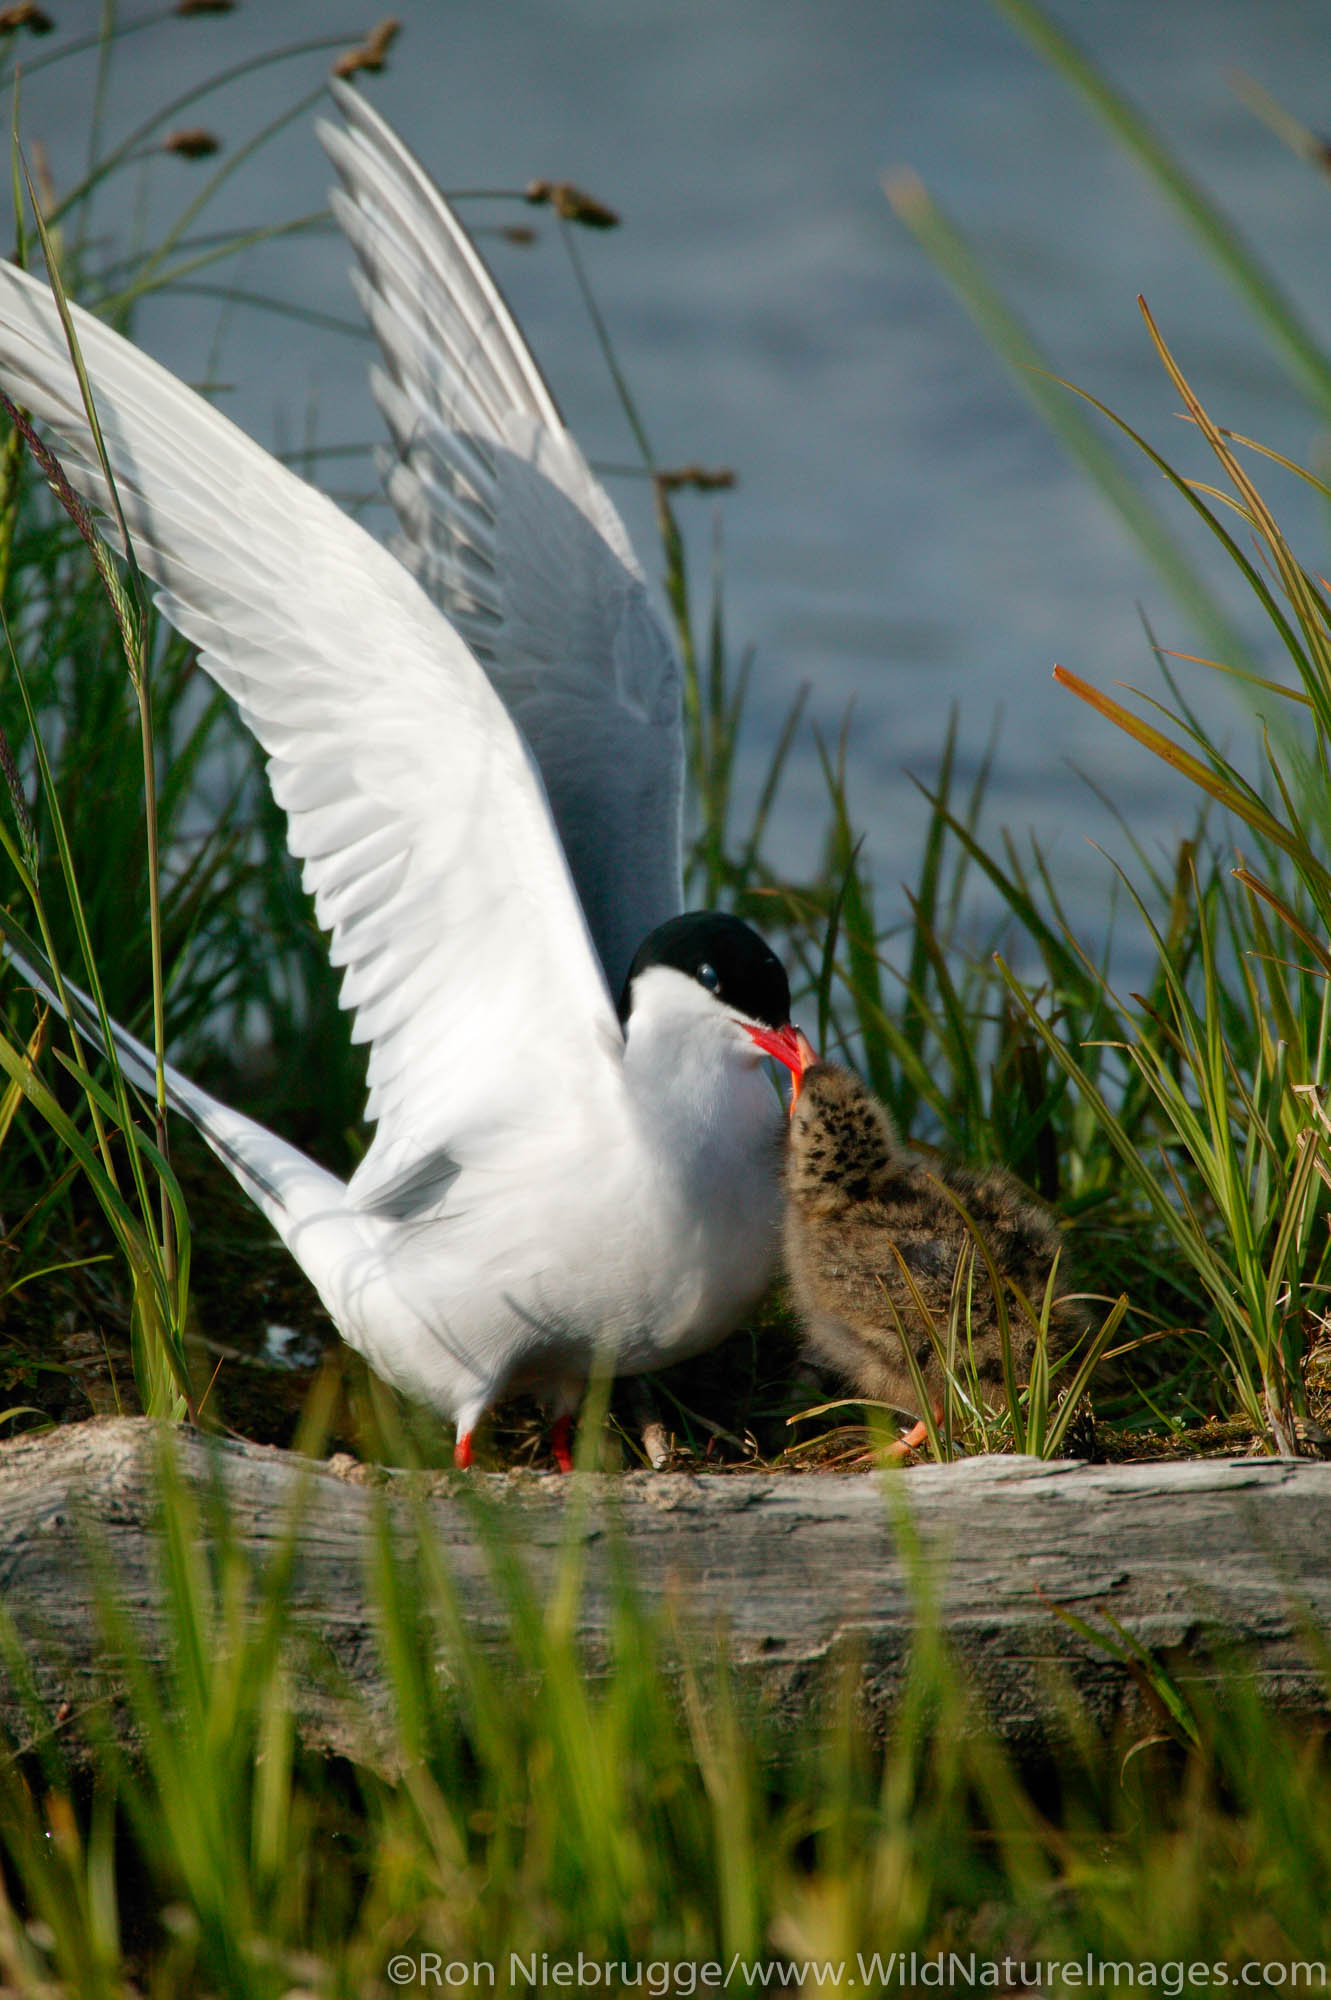 Arctic Tern with chick, at Potter's Marsh, near Anchorage, Alaska.